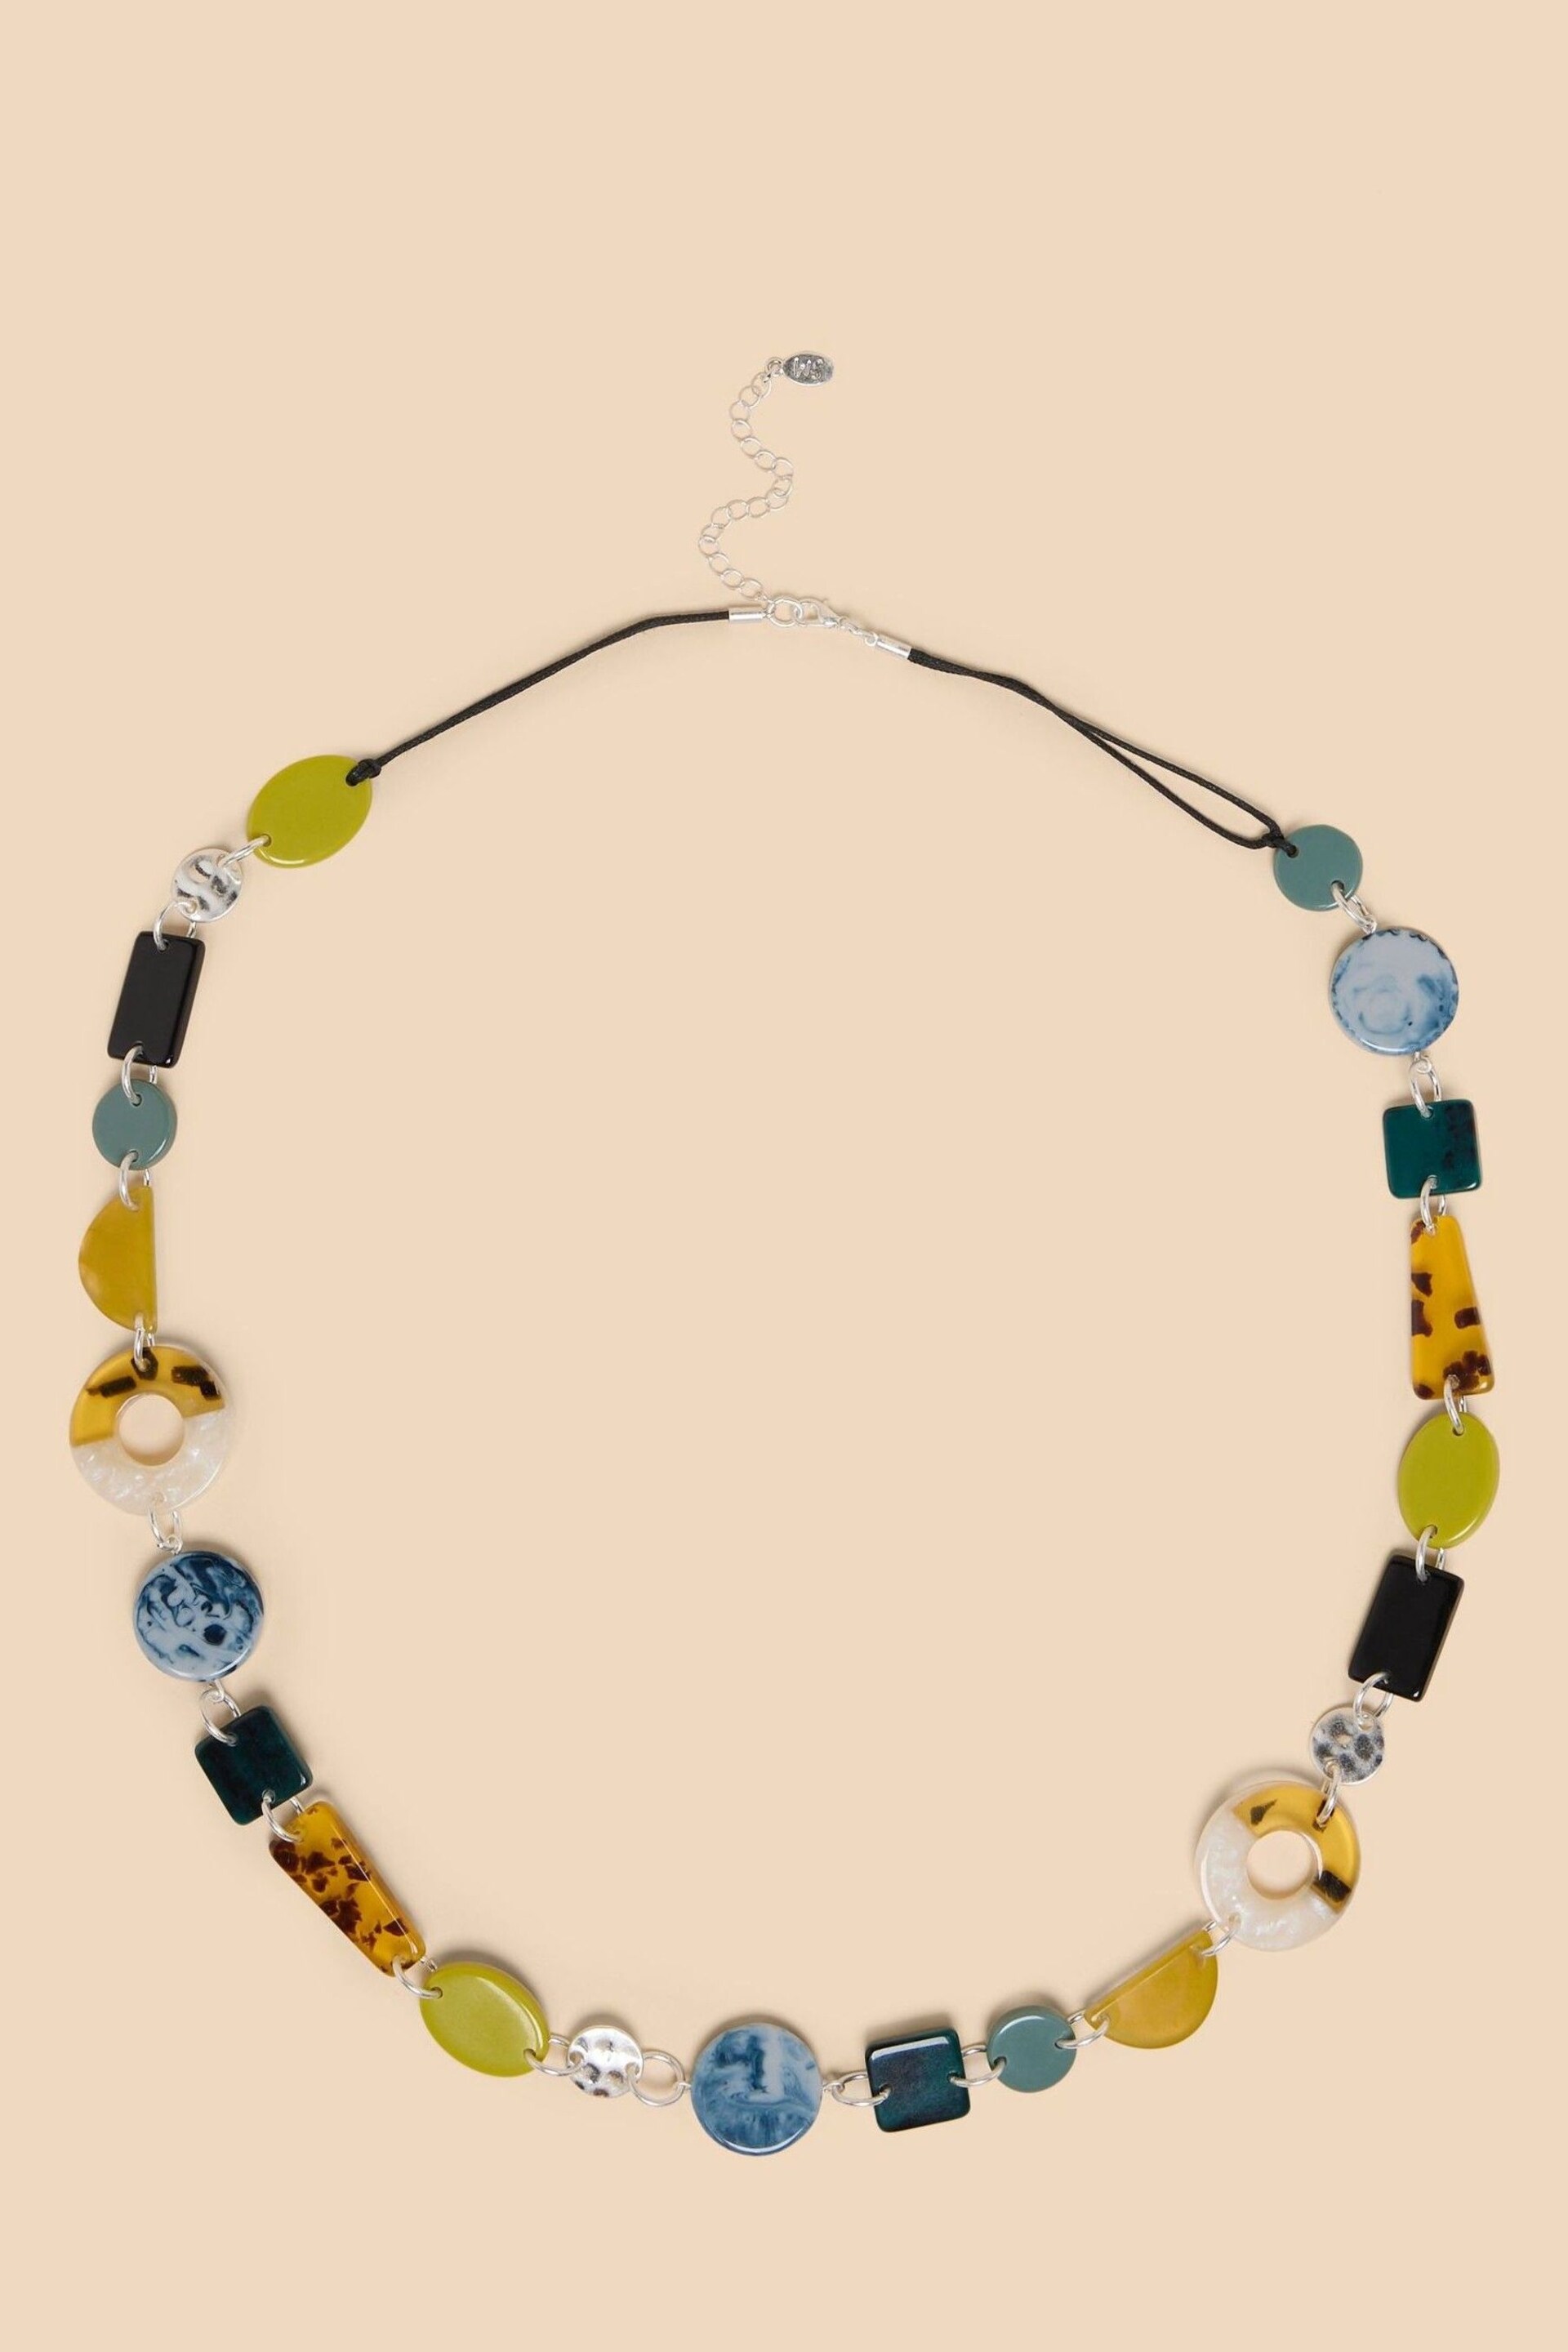 White Stuff Yellow Eden Resin Station Necklace - Image 1 of 2